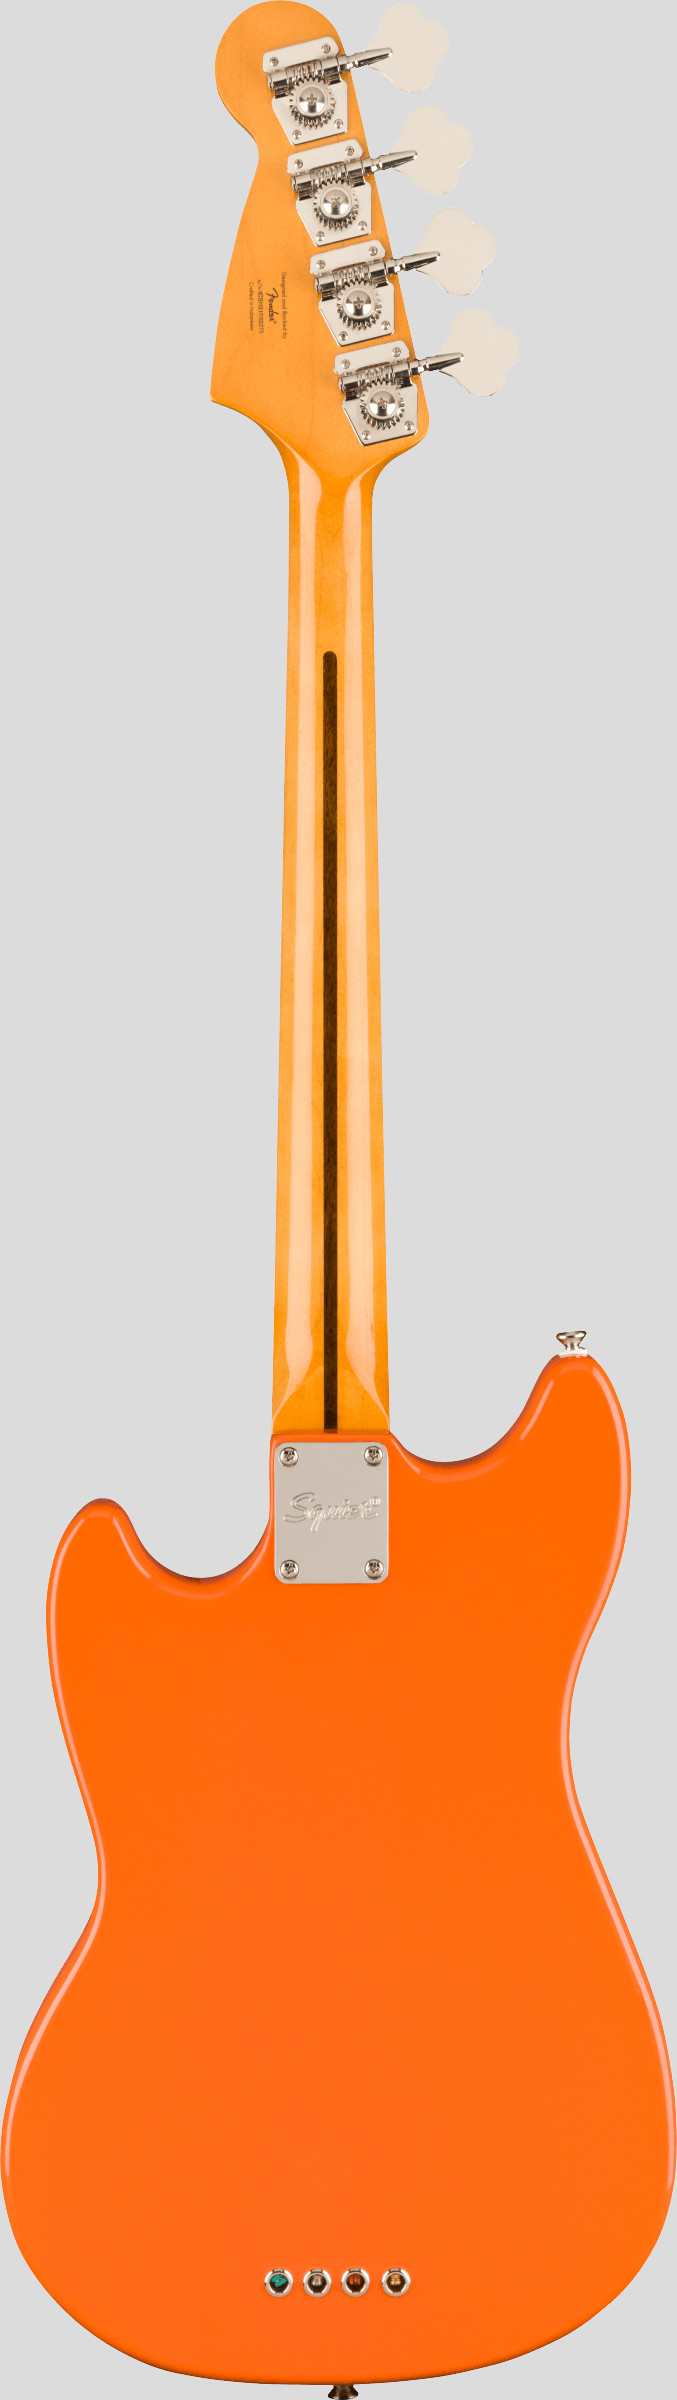 Squier by Fender Limited Edition Classic Vibe 60 Competition Mustang Bass Capri Orange 2